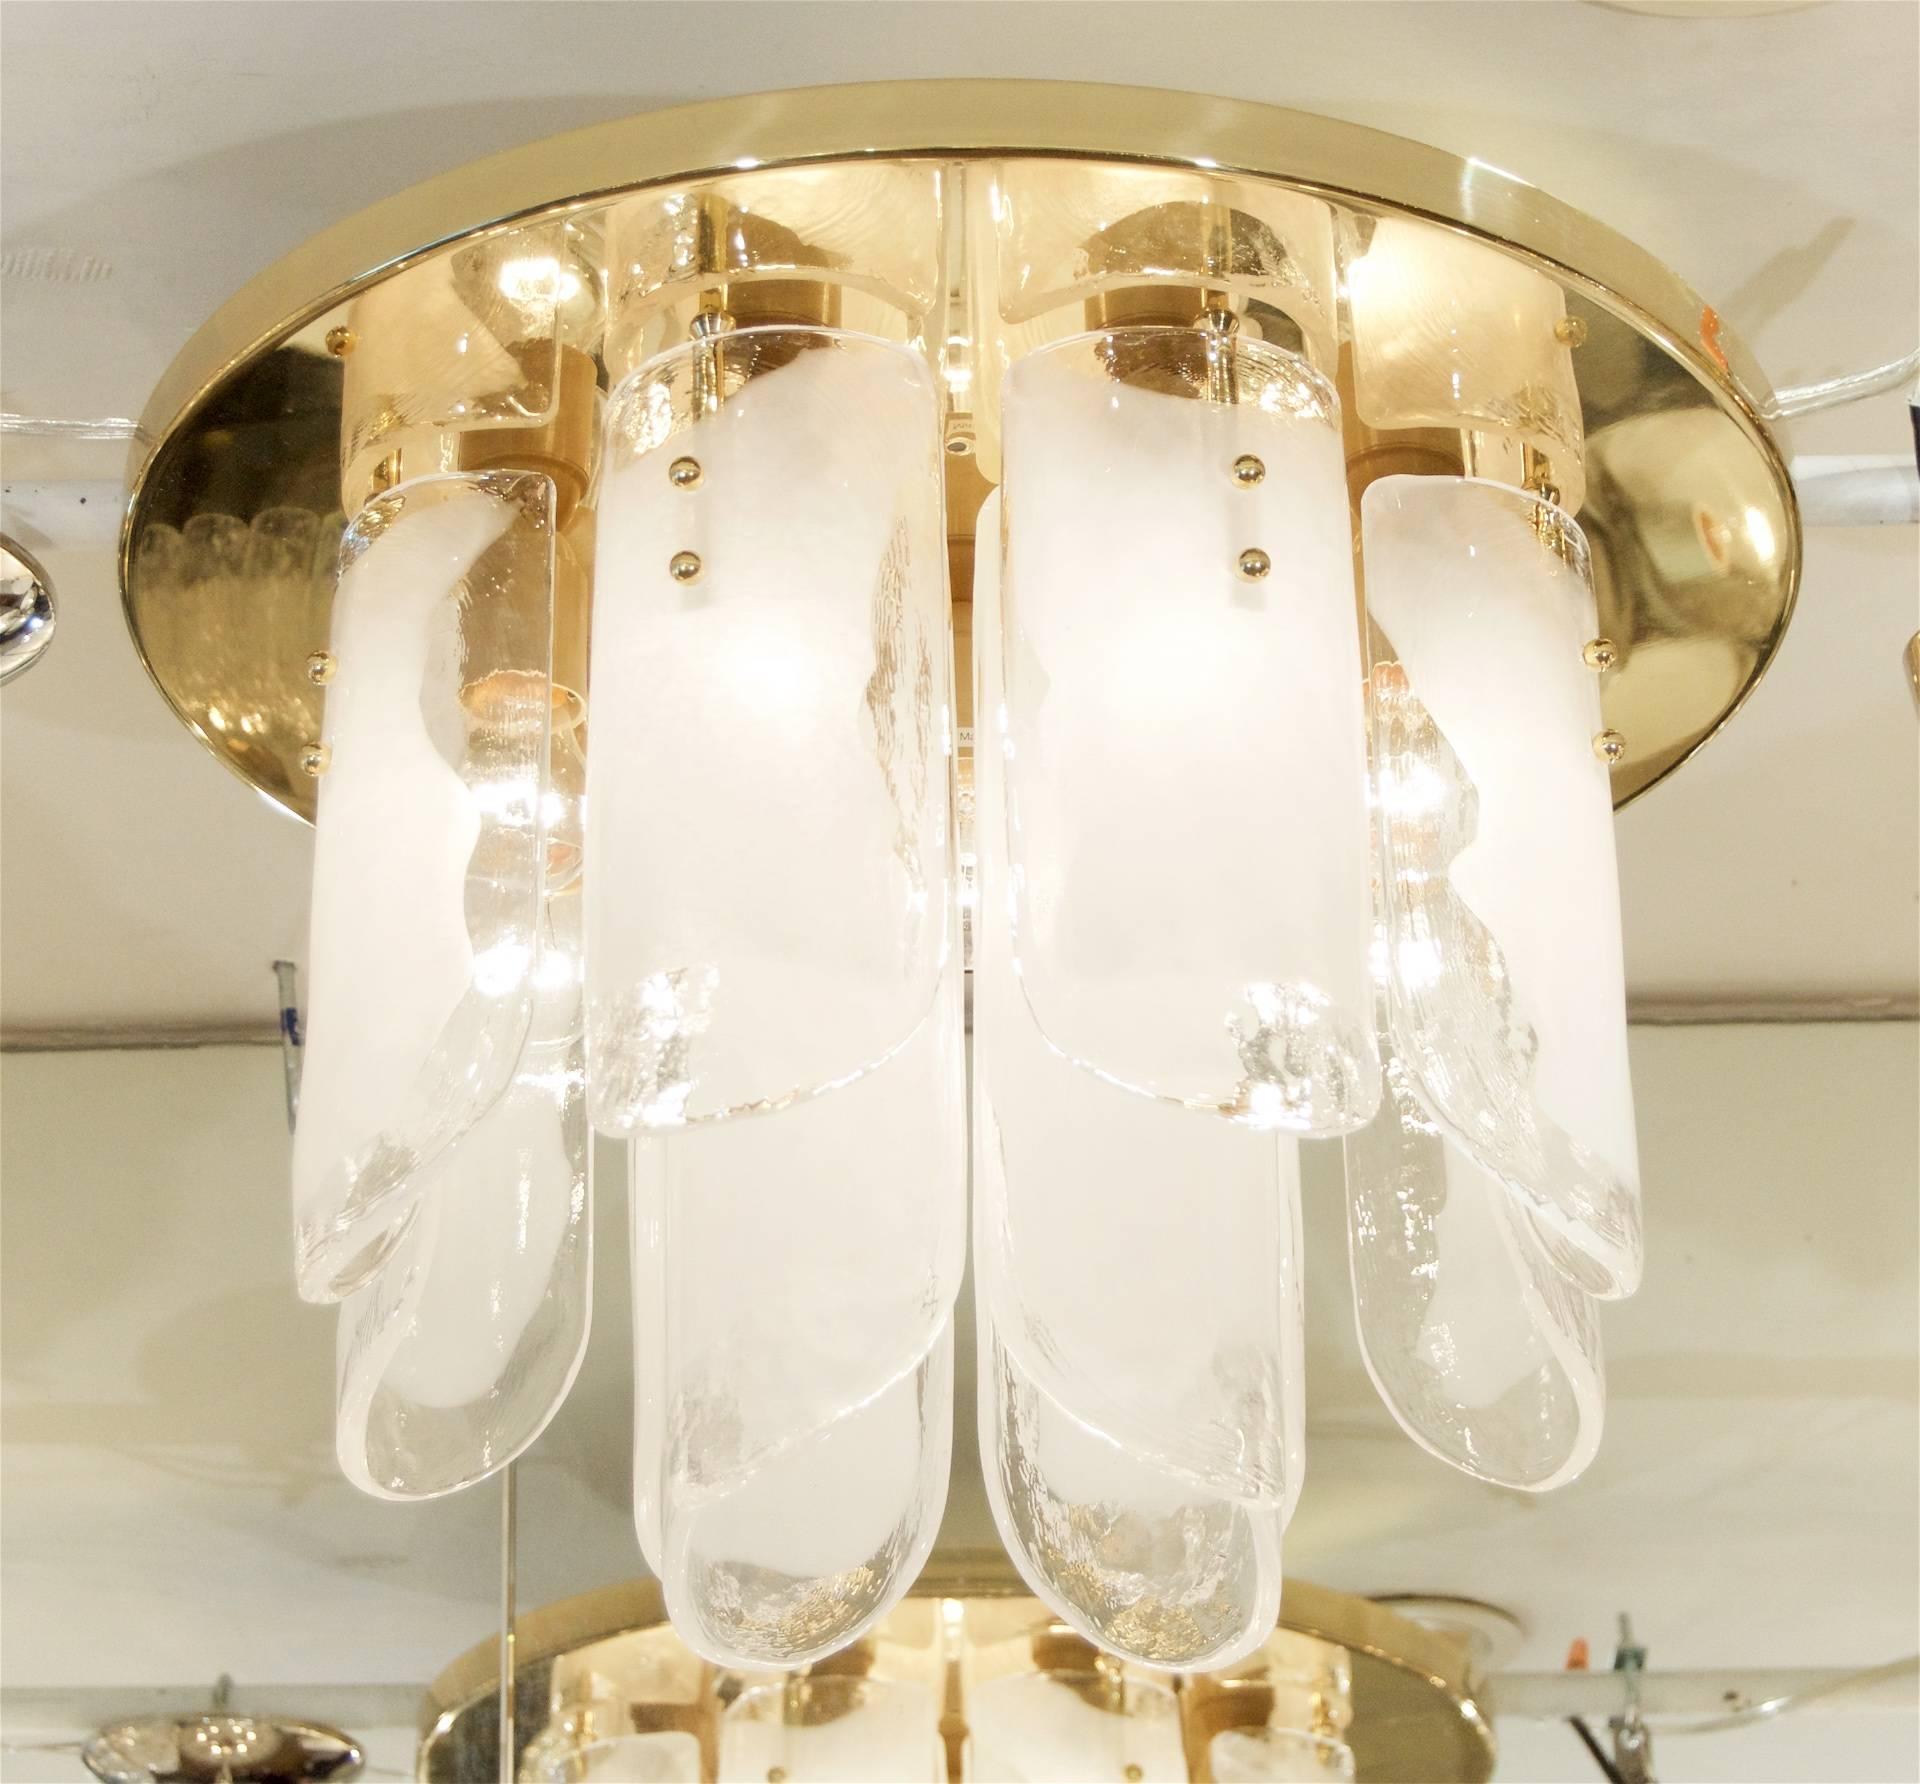 Beautiful Kalmar flush mount chandelier, comprised of two tiers of organic blown glass with opaque white glass centers on a circular brass backplate. 

Takes 9 medium base bulbs up to 60 watts per bulb.